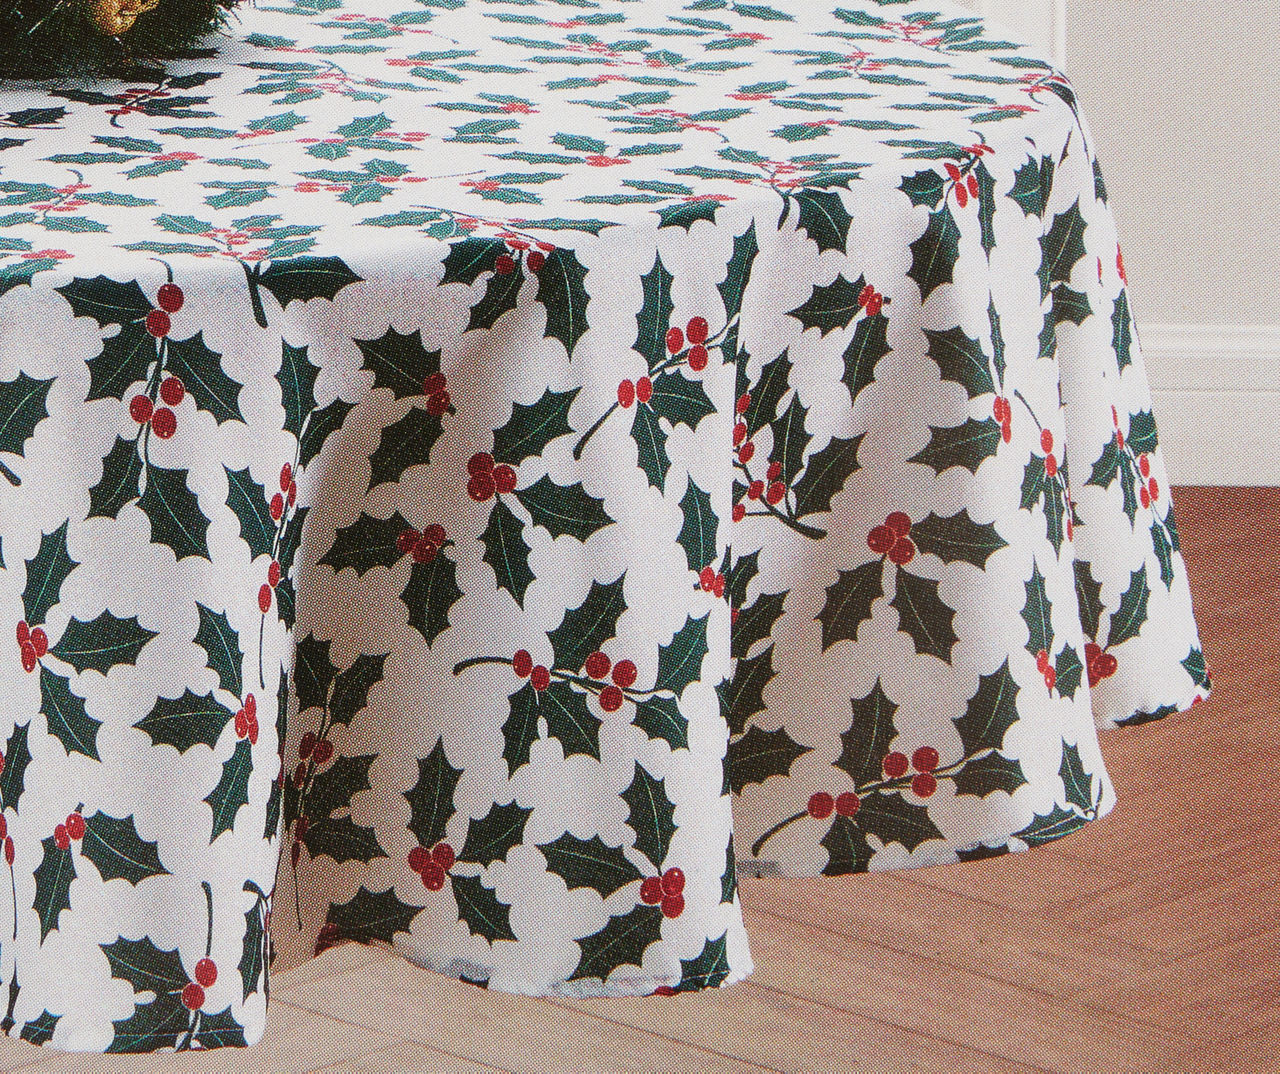 Santa's Workshop White & Green Holly Round Fabric Tablecloth, (60")